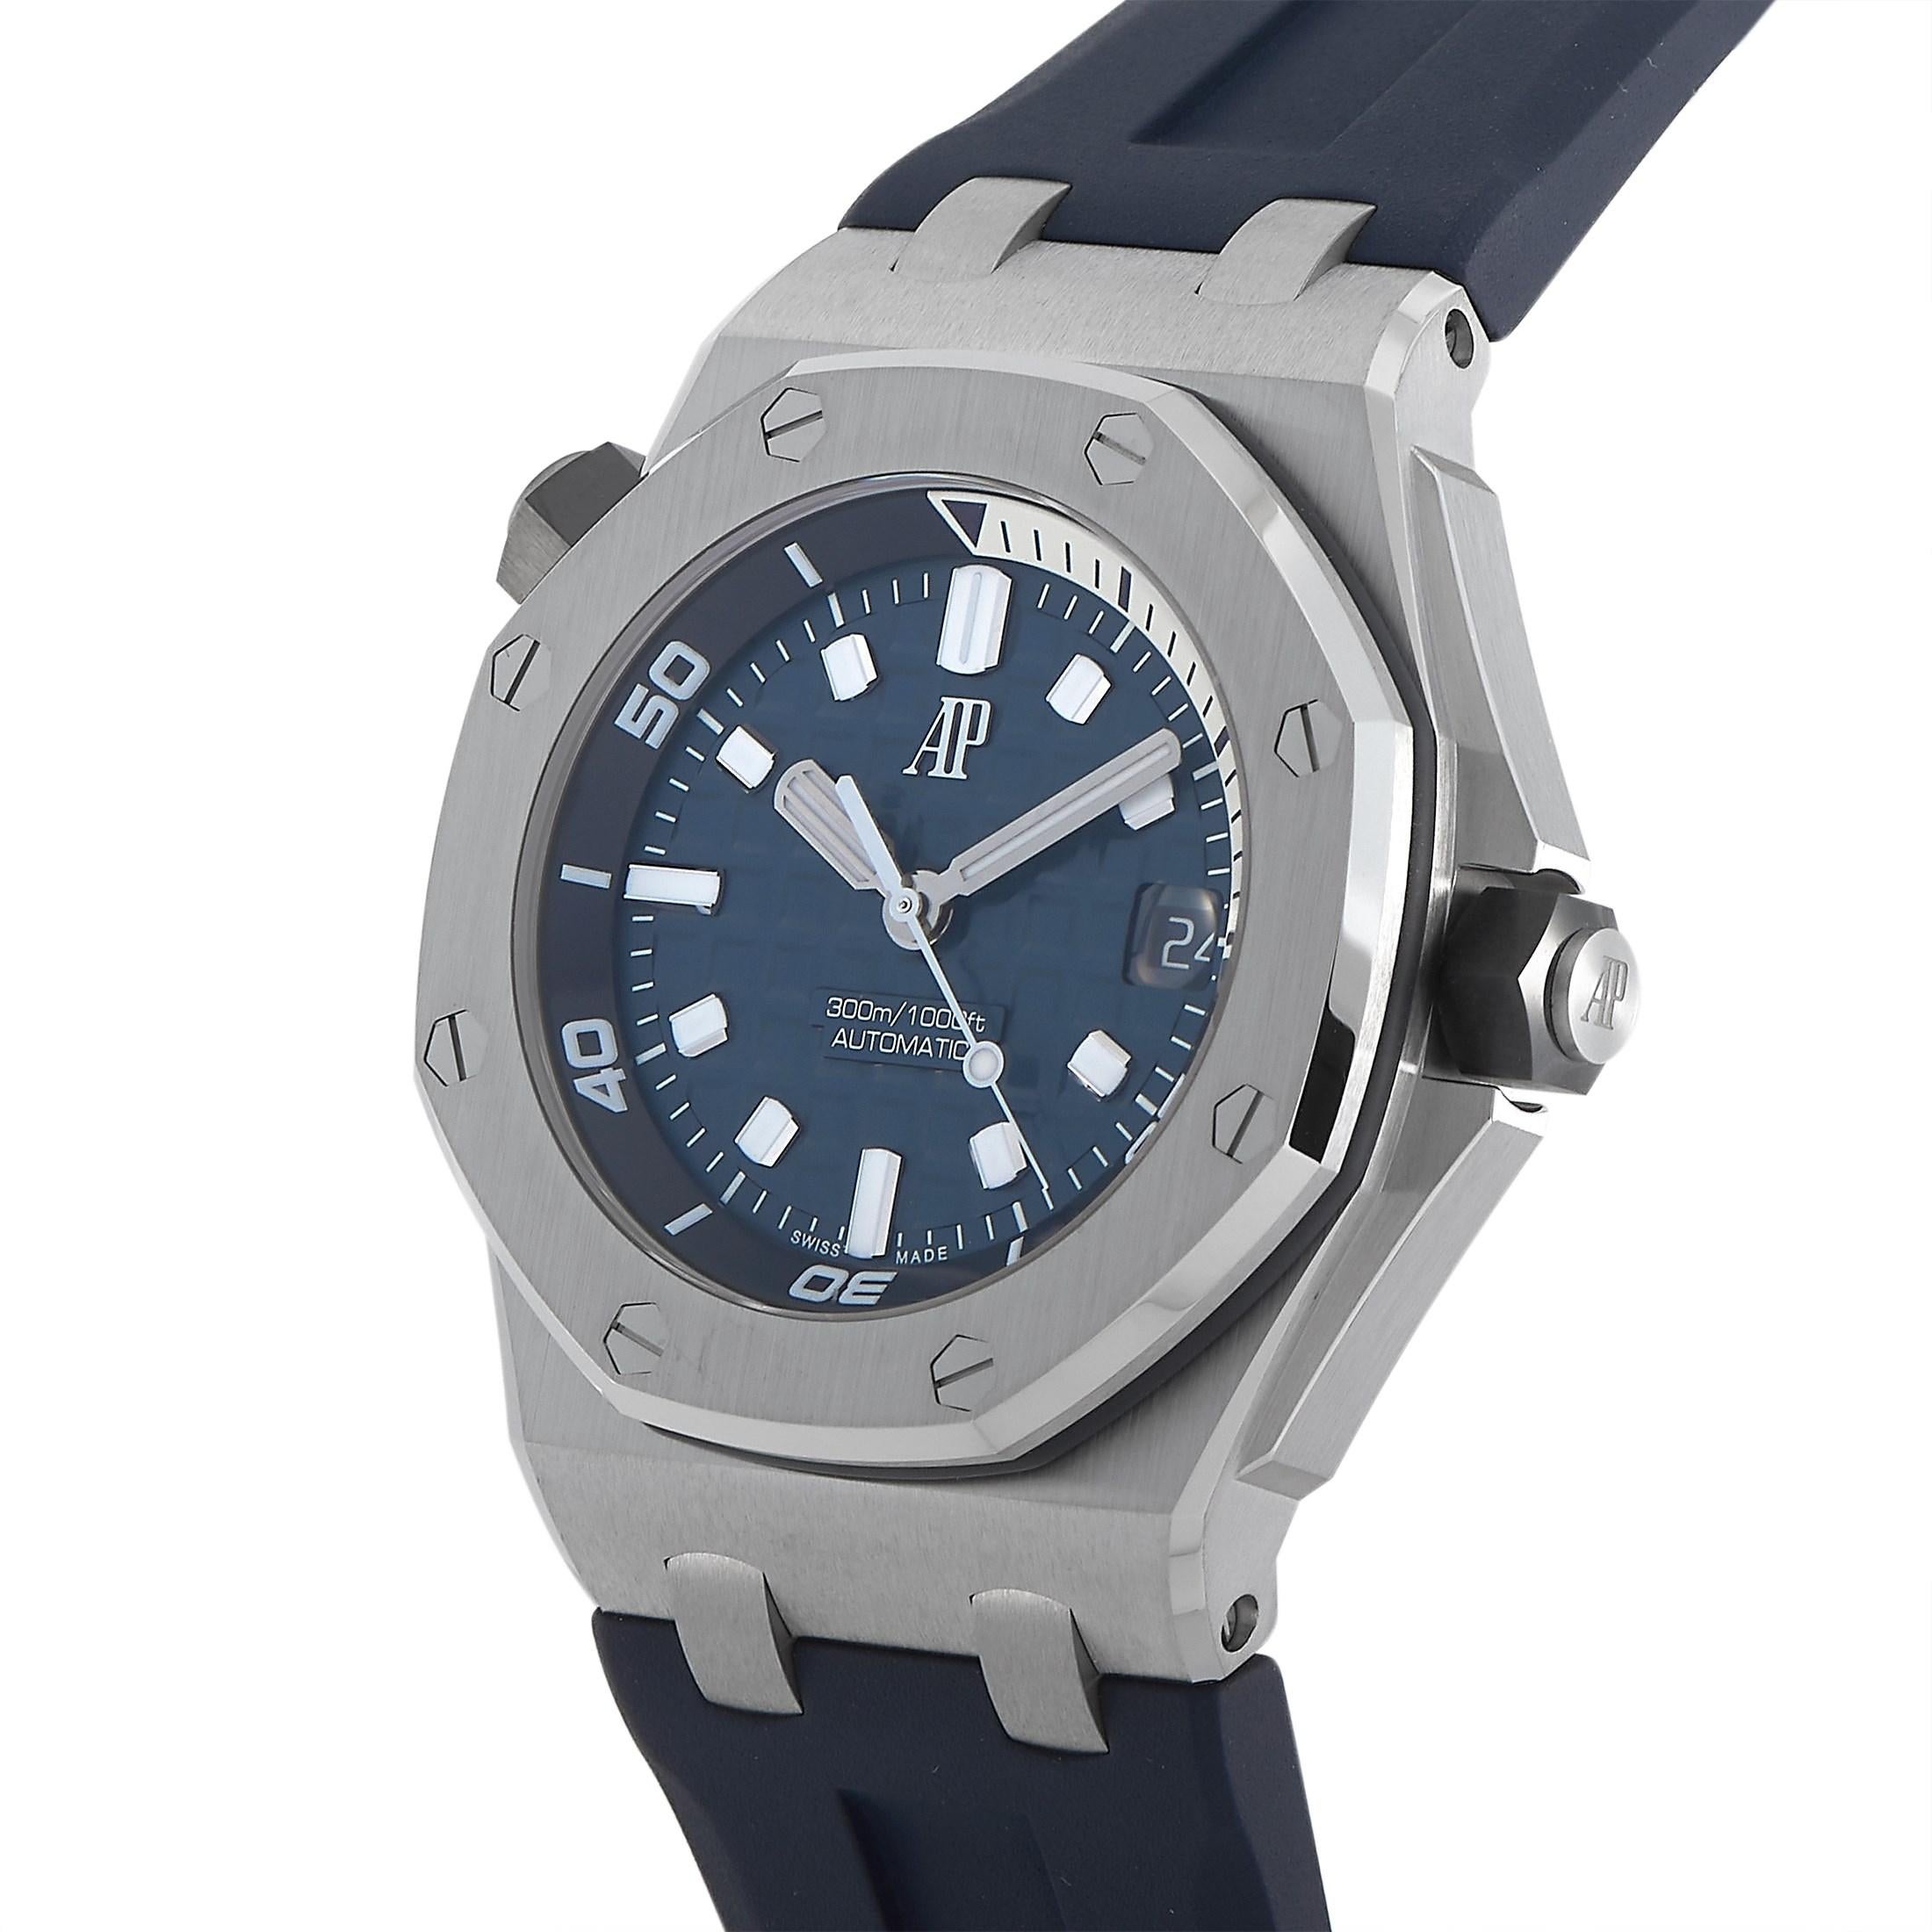 The Audemars Piguet Royal Oak Offshore Watch, reference number 15720ST.00.A027CA.01, is a sophisticated timepiece that is ready for a day out on the water. 

This impeccably designed watch features a 42mm stainless steel case and bezel with bold